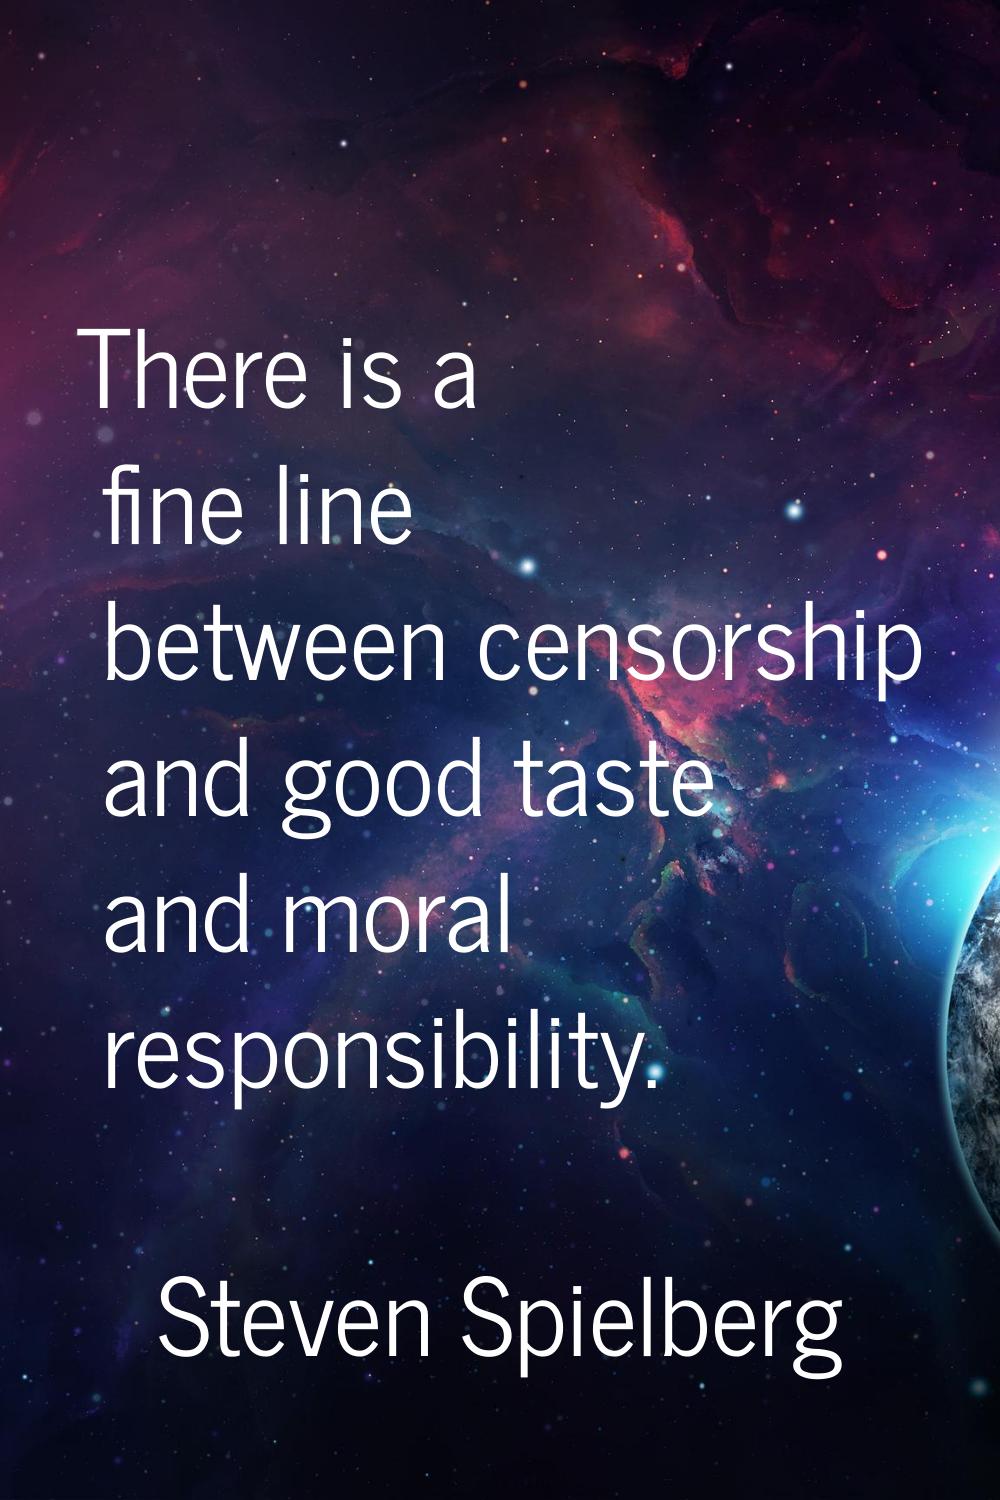 There is a fine line between censorship and good taste and moral responsibility.